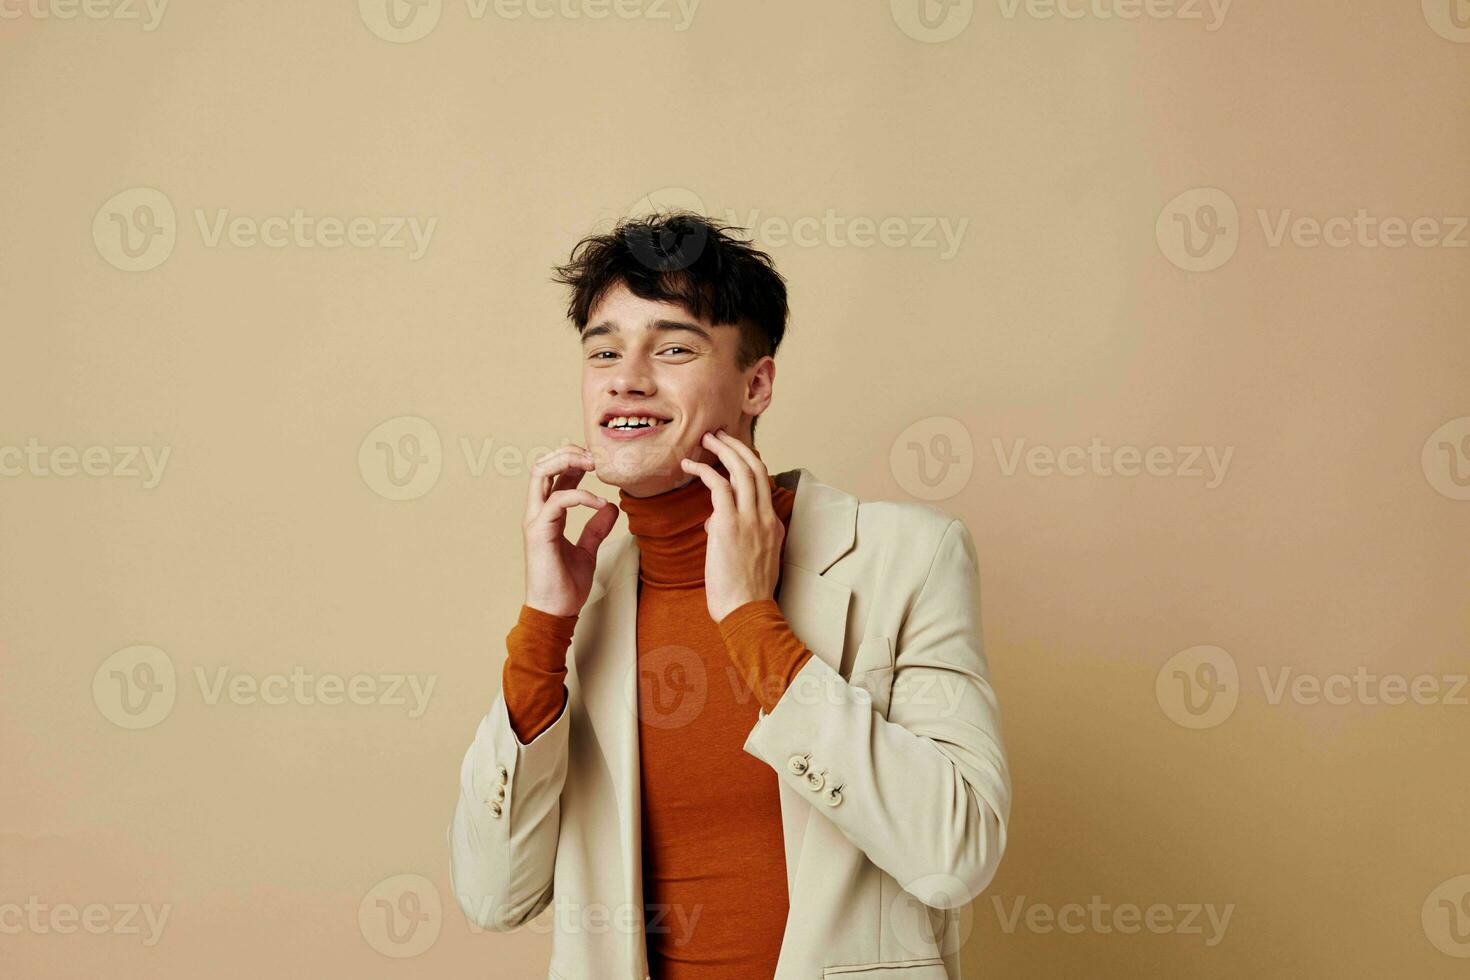 handsome guy posing with a phone in his hands in a jacket elegant style isolated background unaltered photo